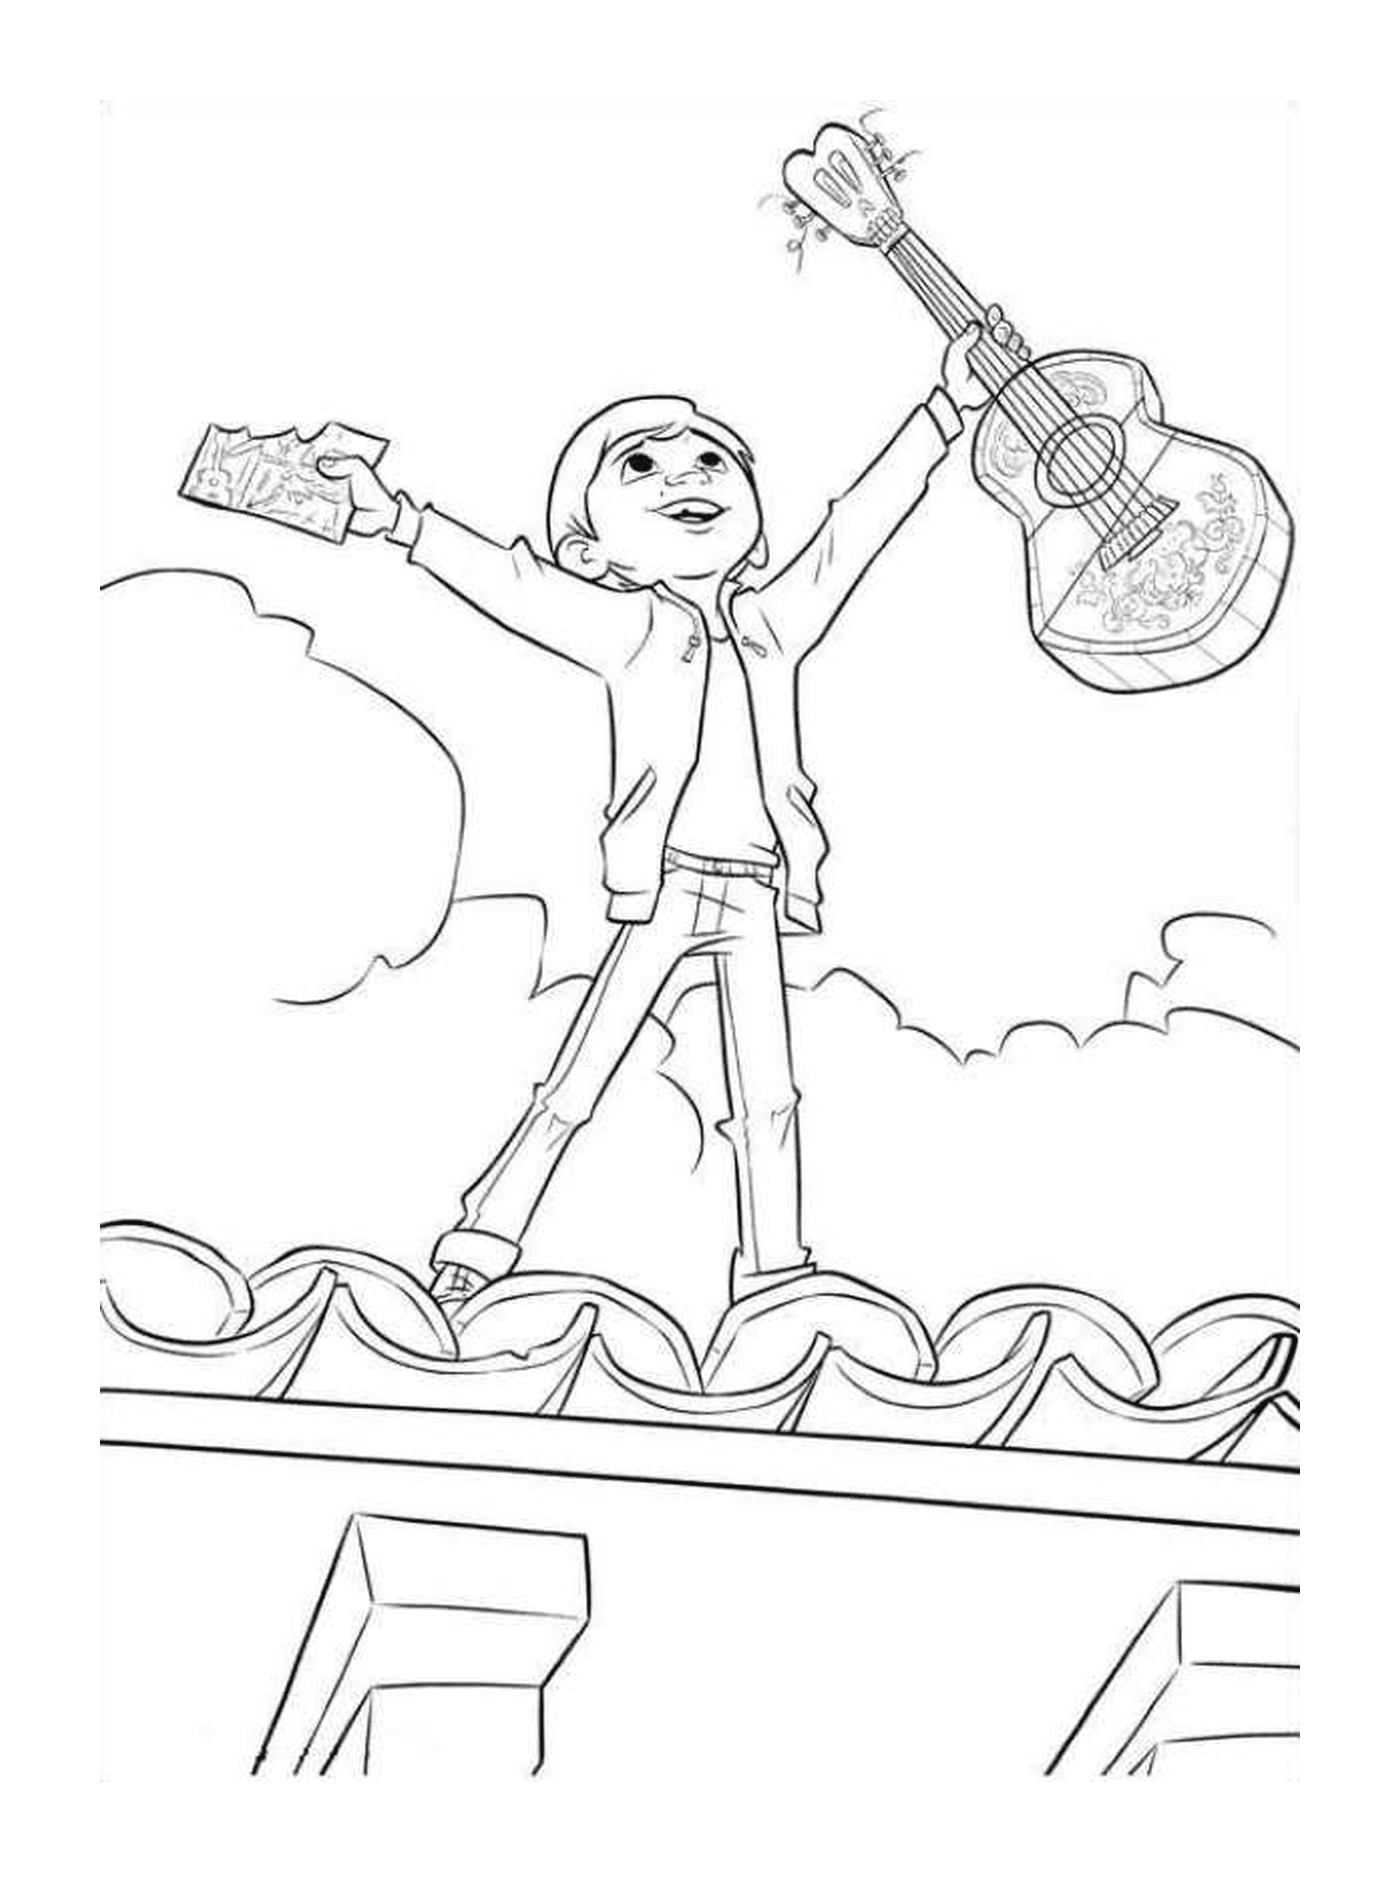  Miguel on the roof of the house with his guitar, symbol of freedom 